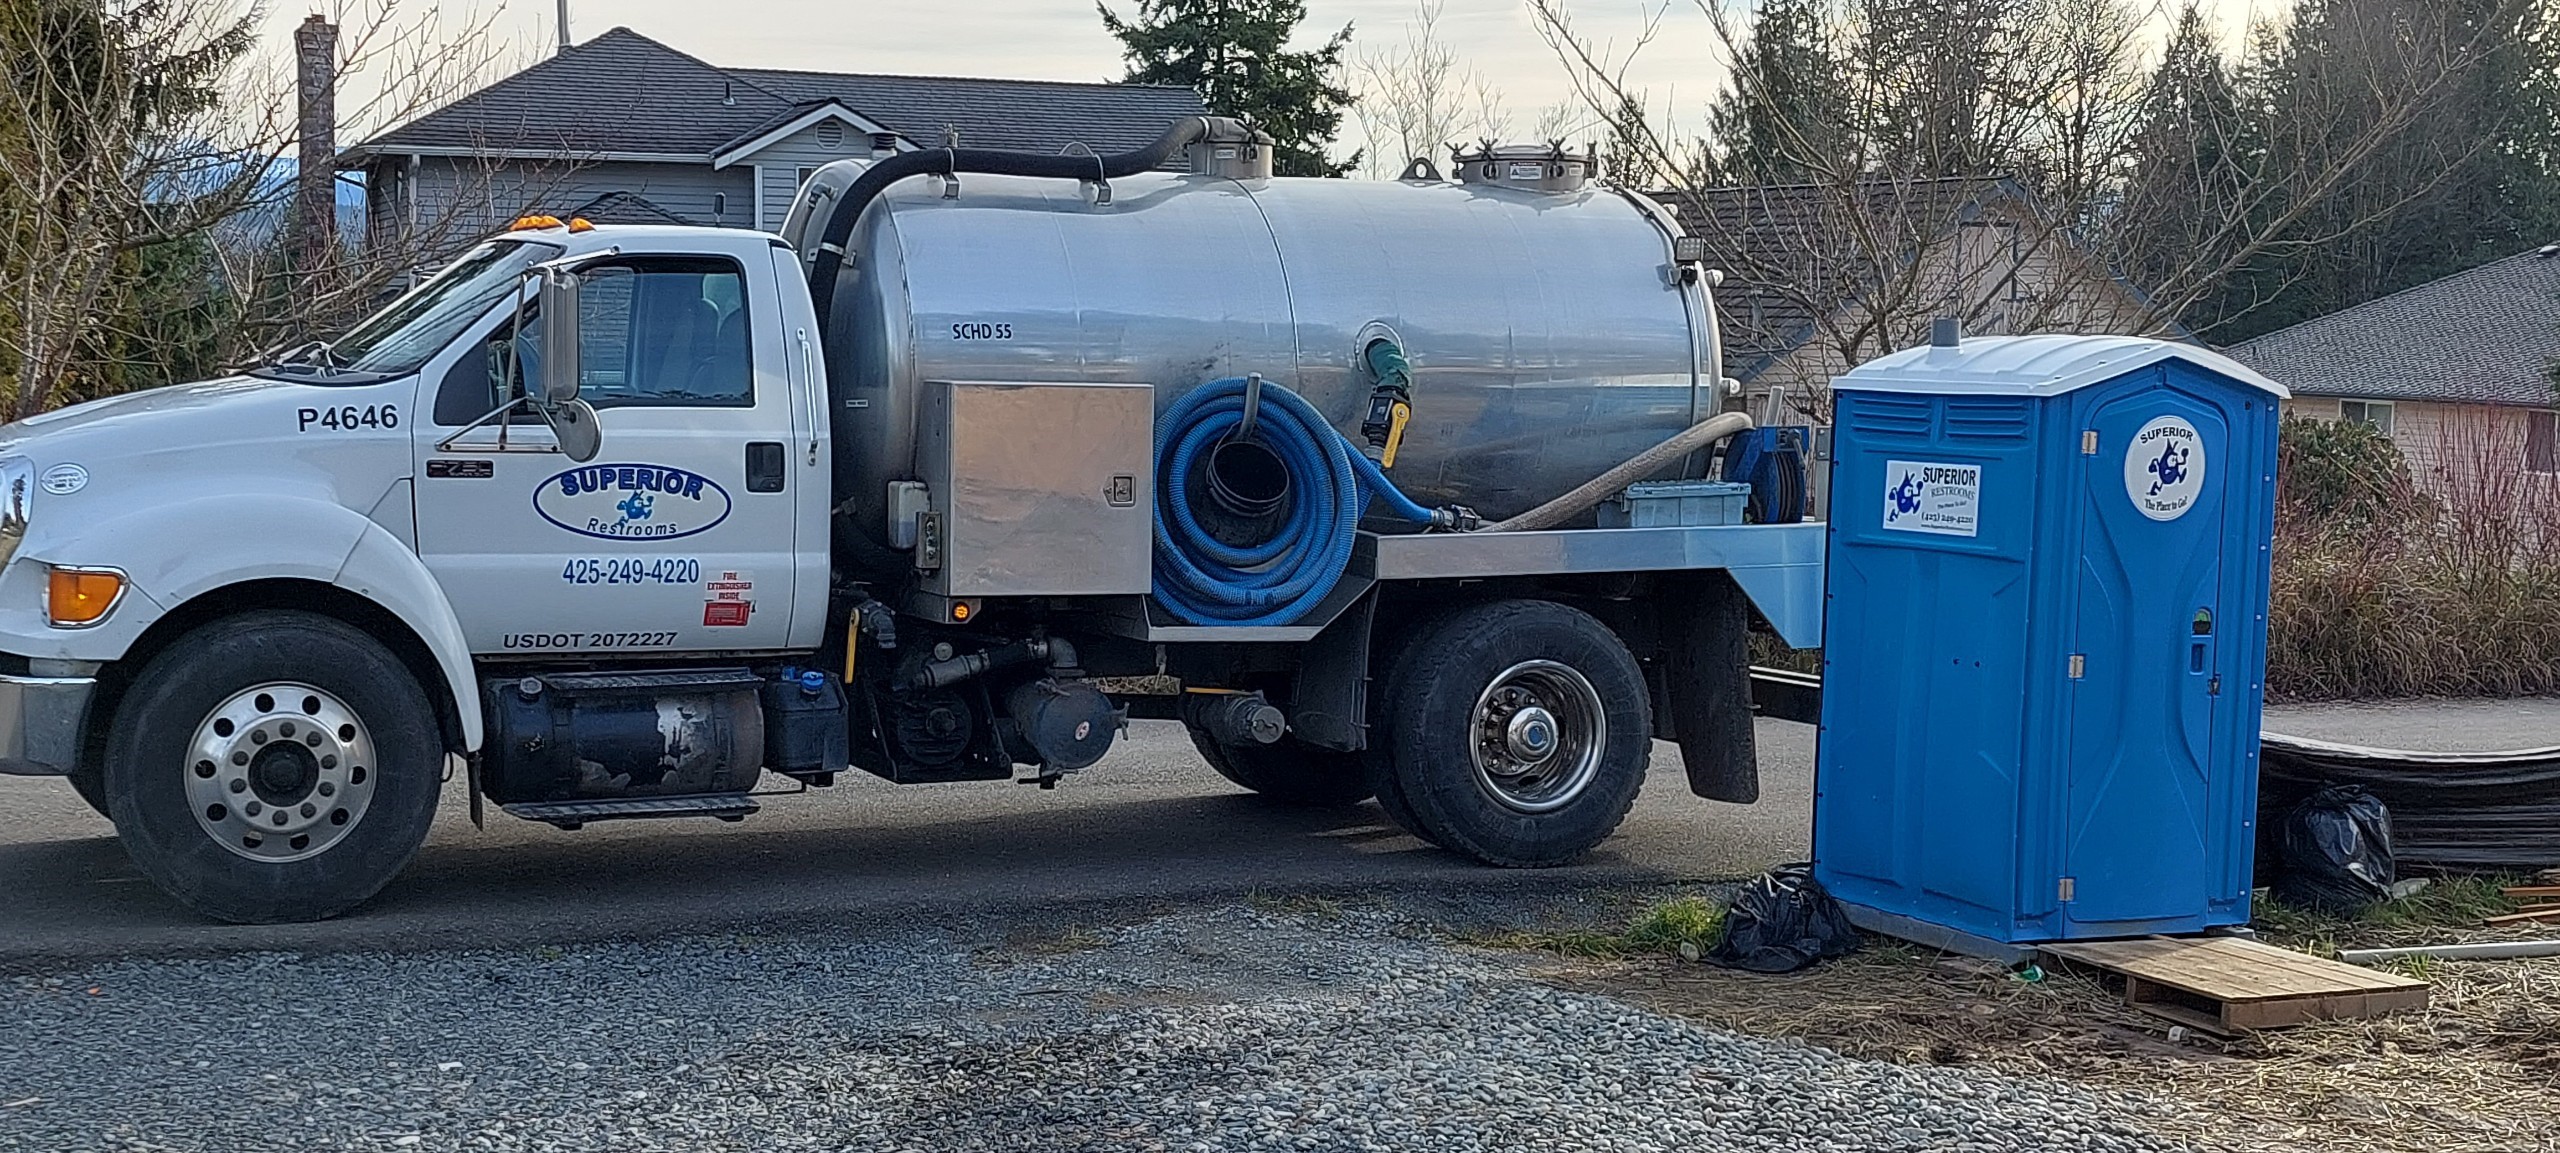 It's Time For Septic Pumping In Lake Stevens!